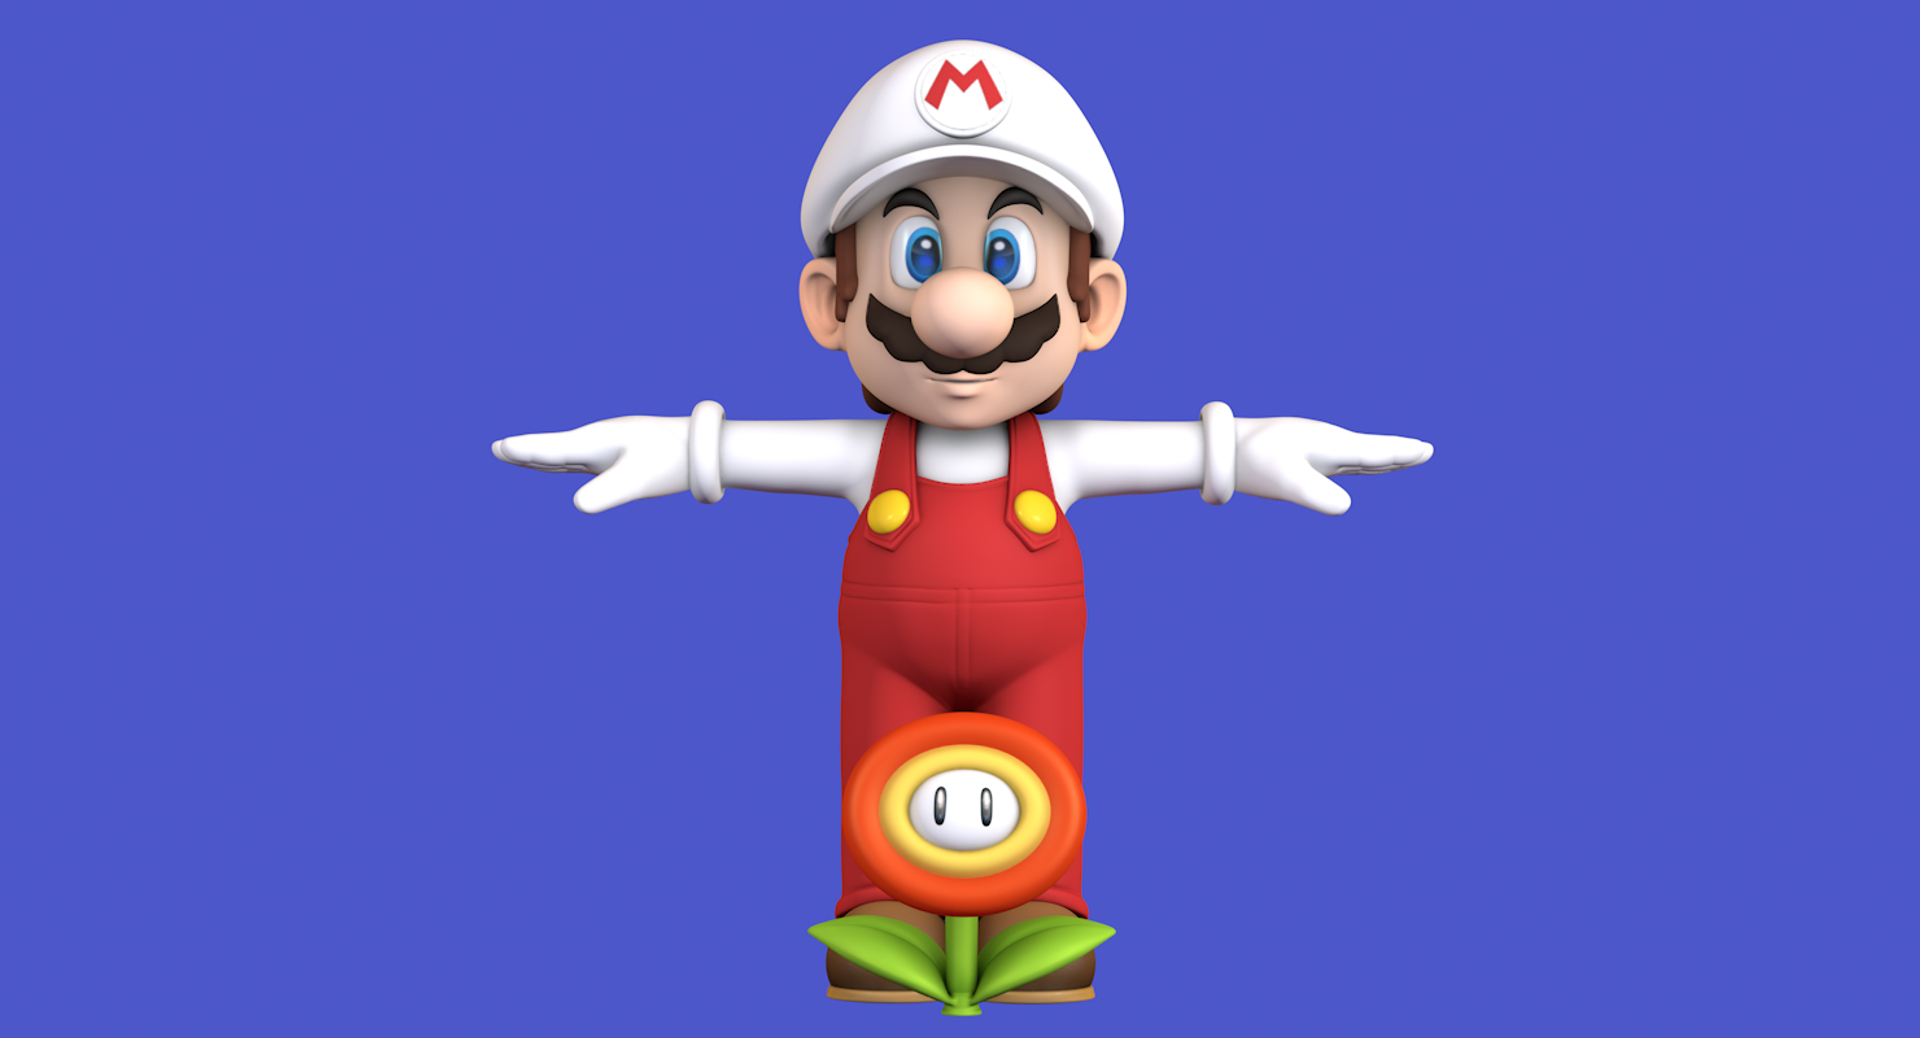 Super Mario on the PS4 Reanimated [Blender] 